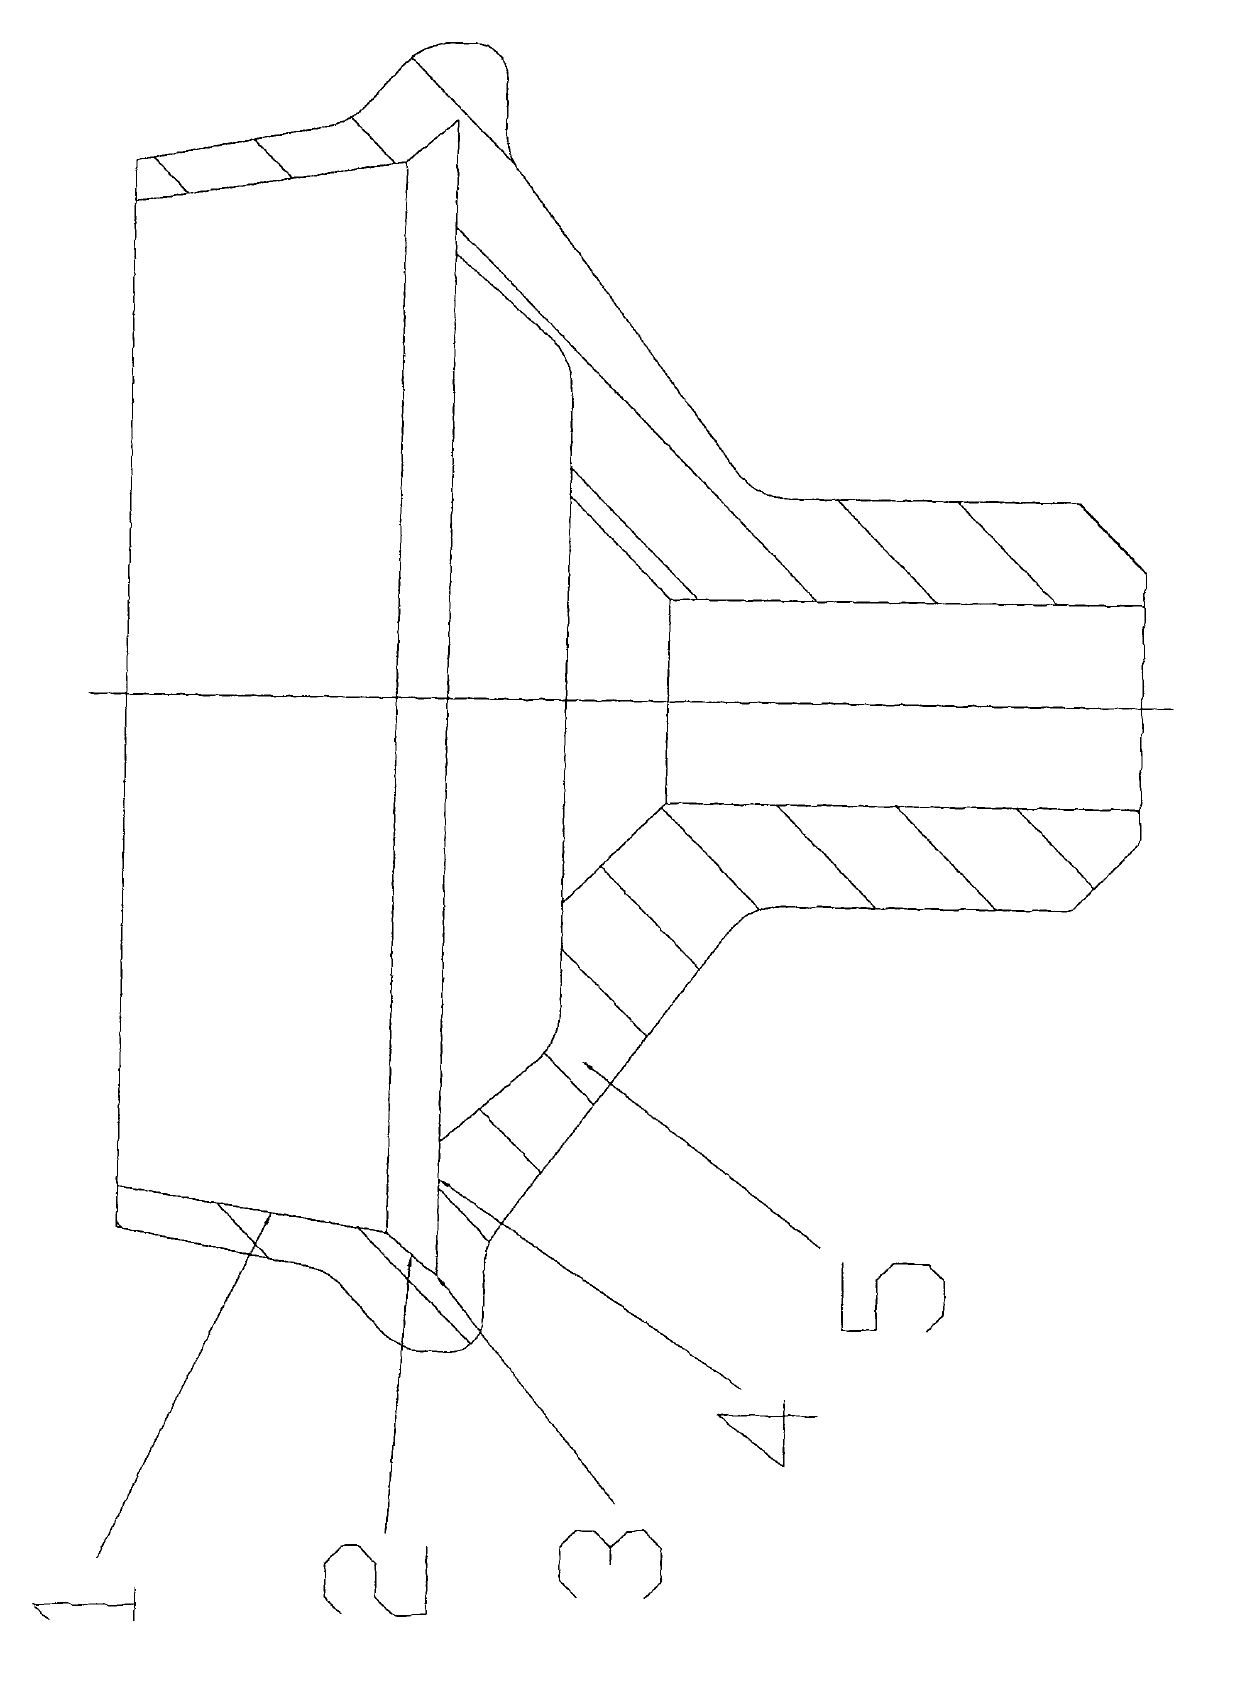 Process for surface treatment of internal wall of open-end spinning frame rotor